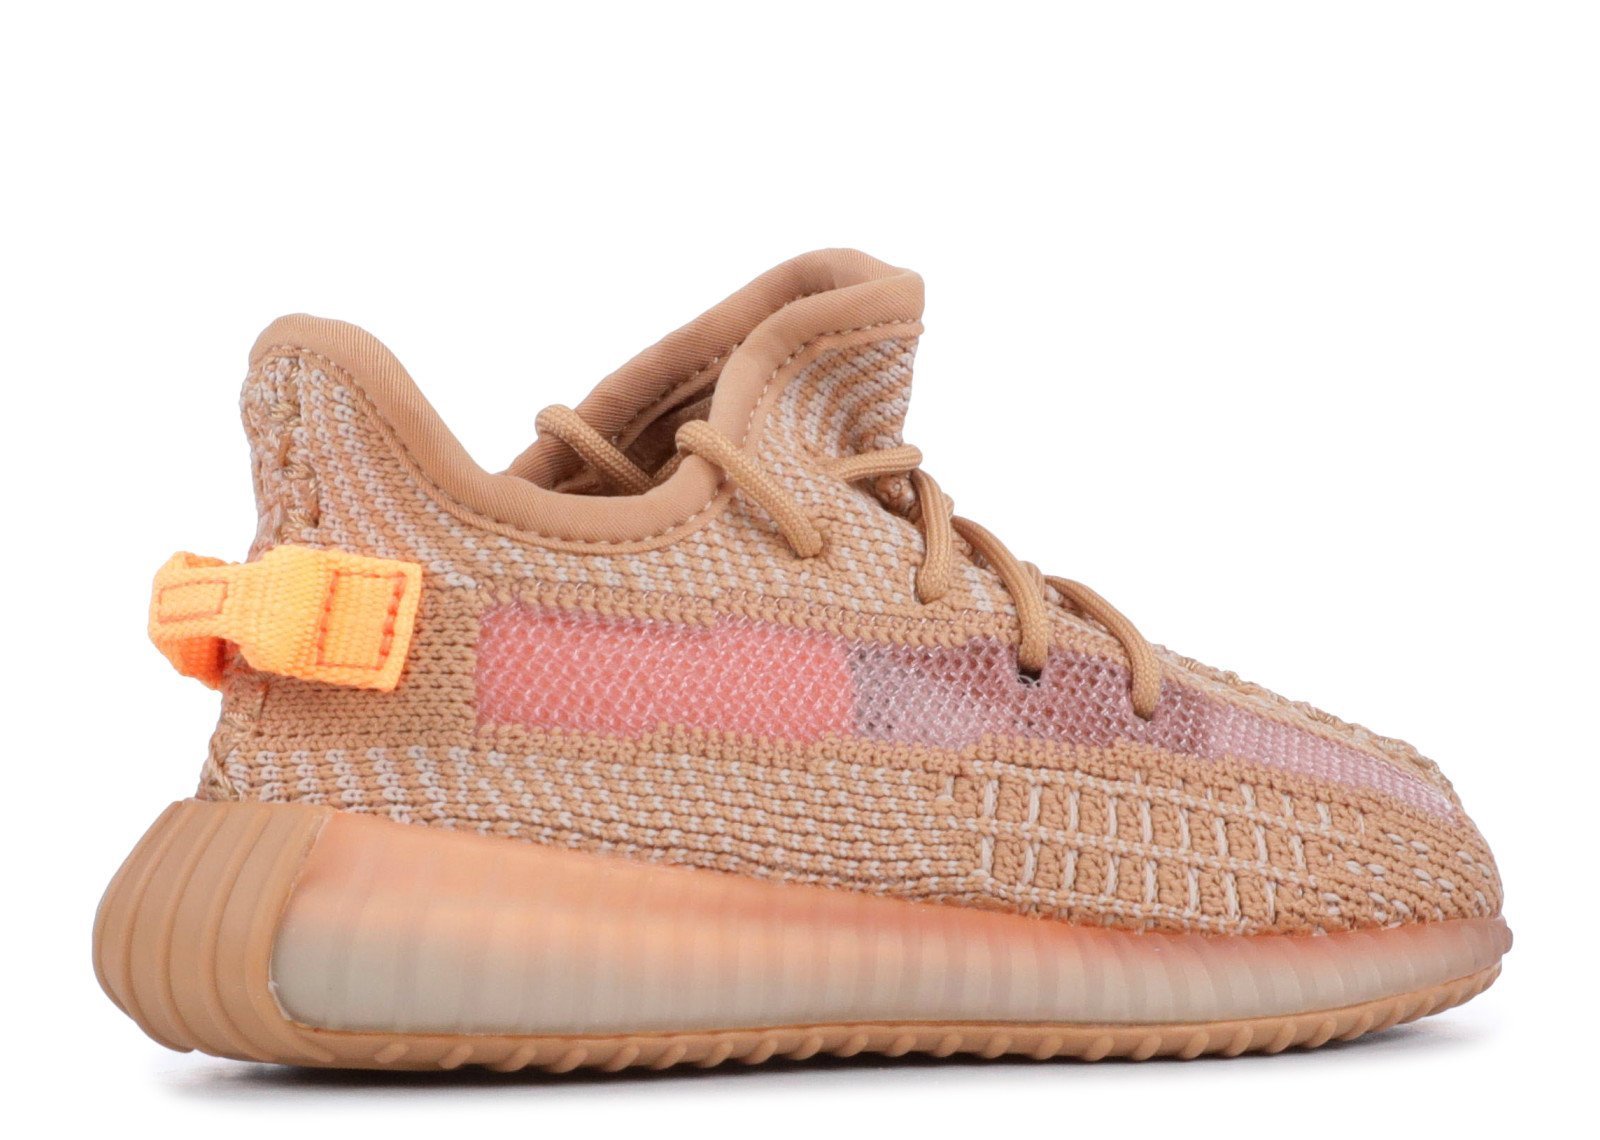 yeezy boost clay infant